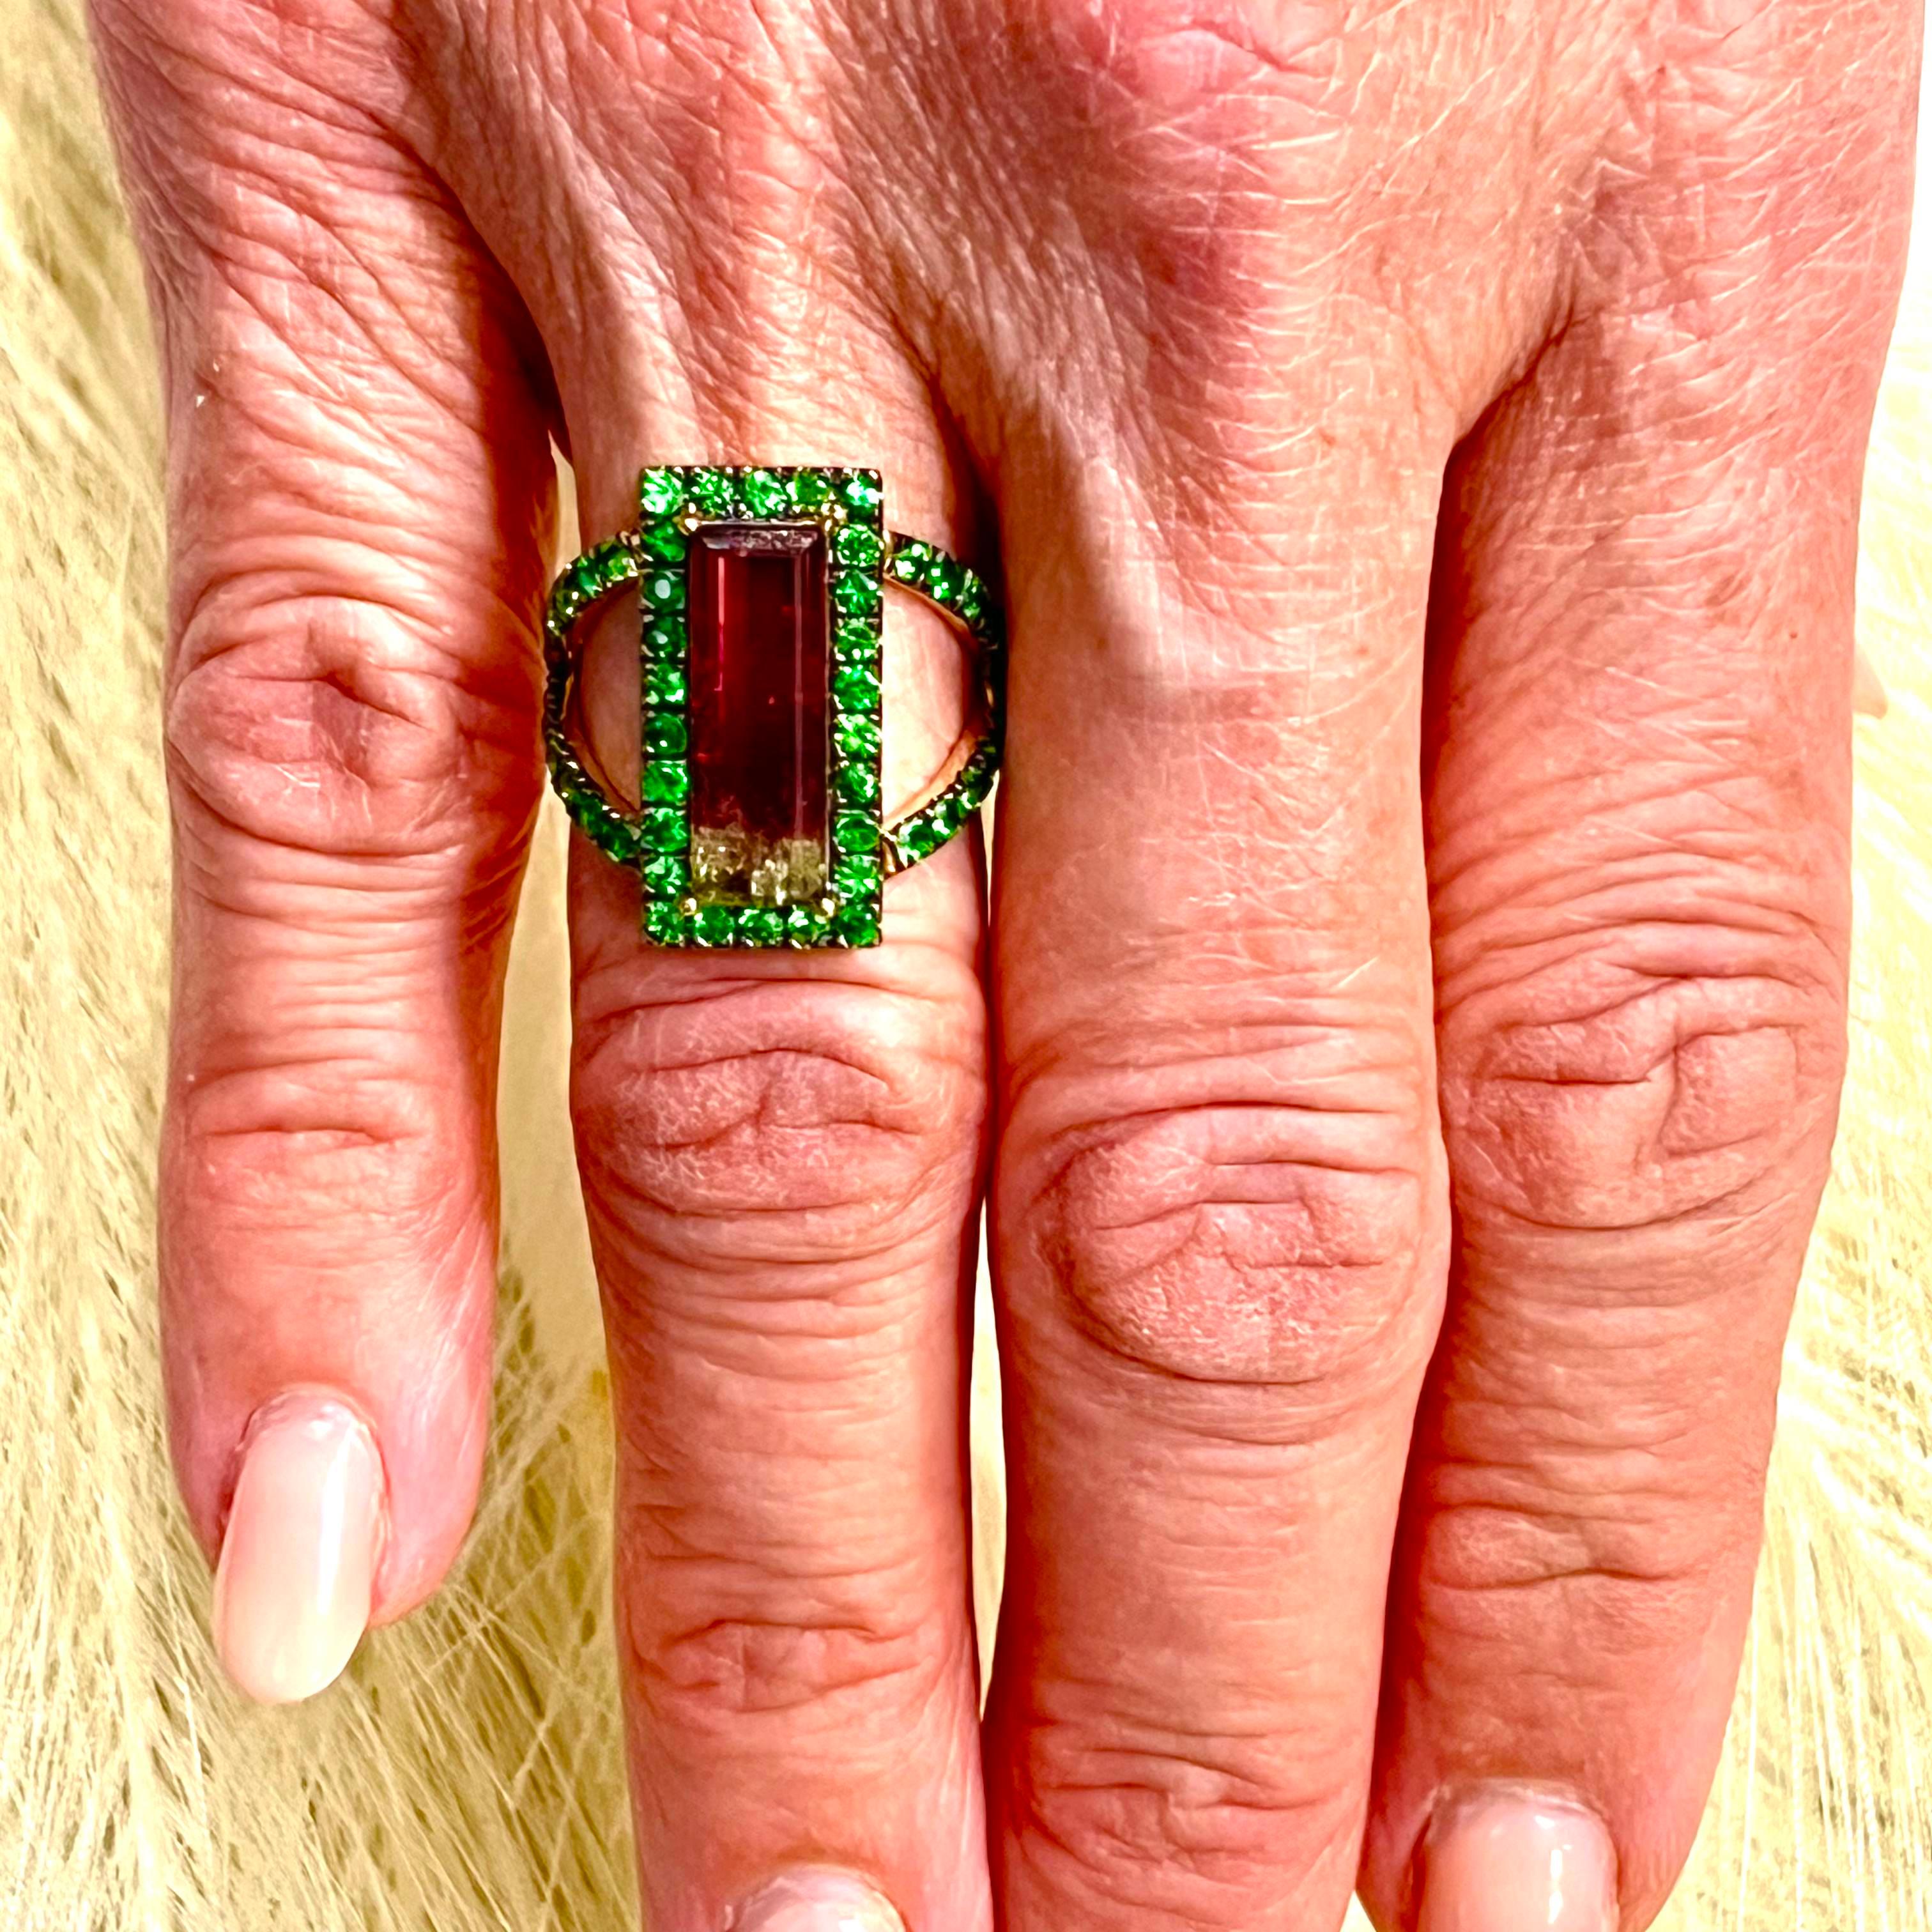 Finely Faceted Quality Natural Watermelon Tourmaline Tsavorite Ring 7 14k YG 4.7 TCW Certified $5,950 300684

This is a one of a Kind Unique Custom Made Glamorous Piece of Jewelry!

Nothing says, “I Love you” more than Diamonds and Pearls!

This